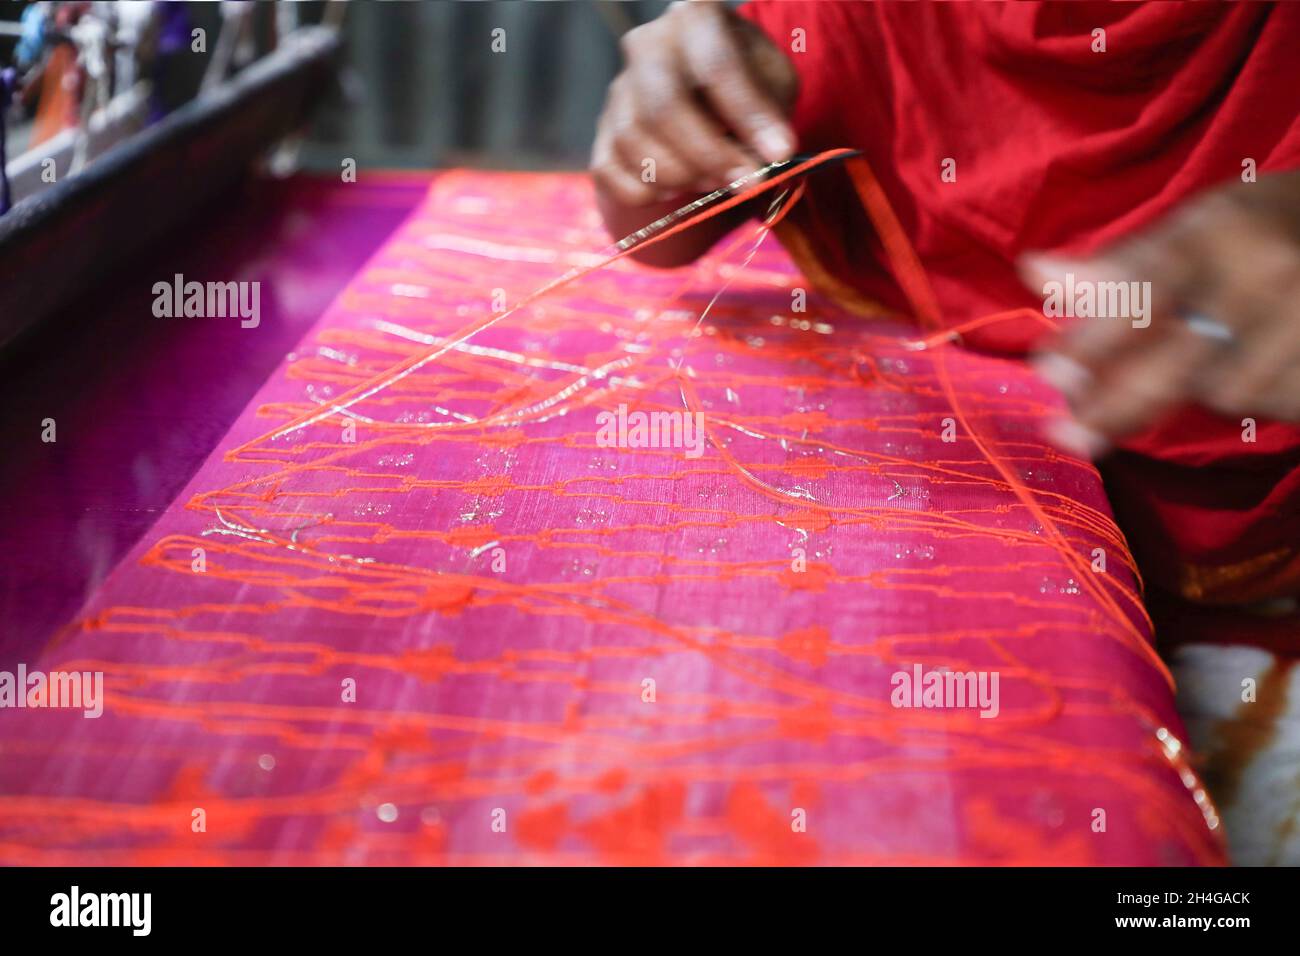 Dhaka, Bangladesh. 02nd Nov, 2021. A women seen making Jamdani saree at Demra Jamdani Palli. Jamdani is one of the finest muslin textiels of Bengal, produced in Dhaka District, Bangladesh for centuries. The Historic production of jamdani was patronized by imperial warrants of the Mughal emperors. Under British colonialism, the Bengali Jamdani and muslin industries rapidly declined due to colonial import policies favoring industrially manufactured textiles. Credit: SOPA Images Limited/Alamy Live News Stock Photo